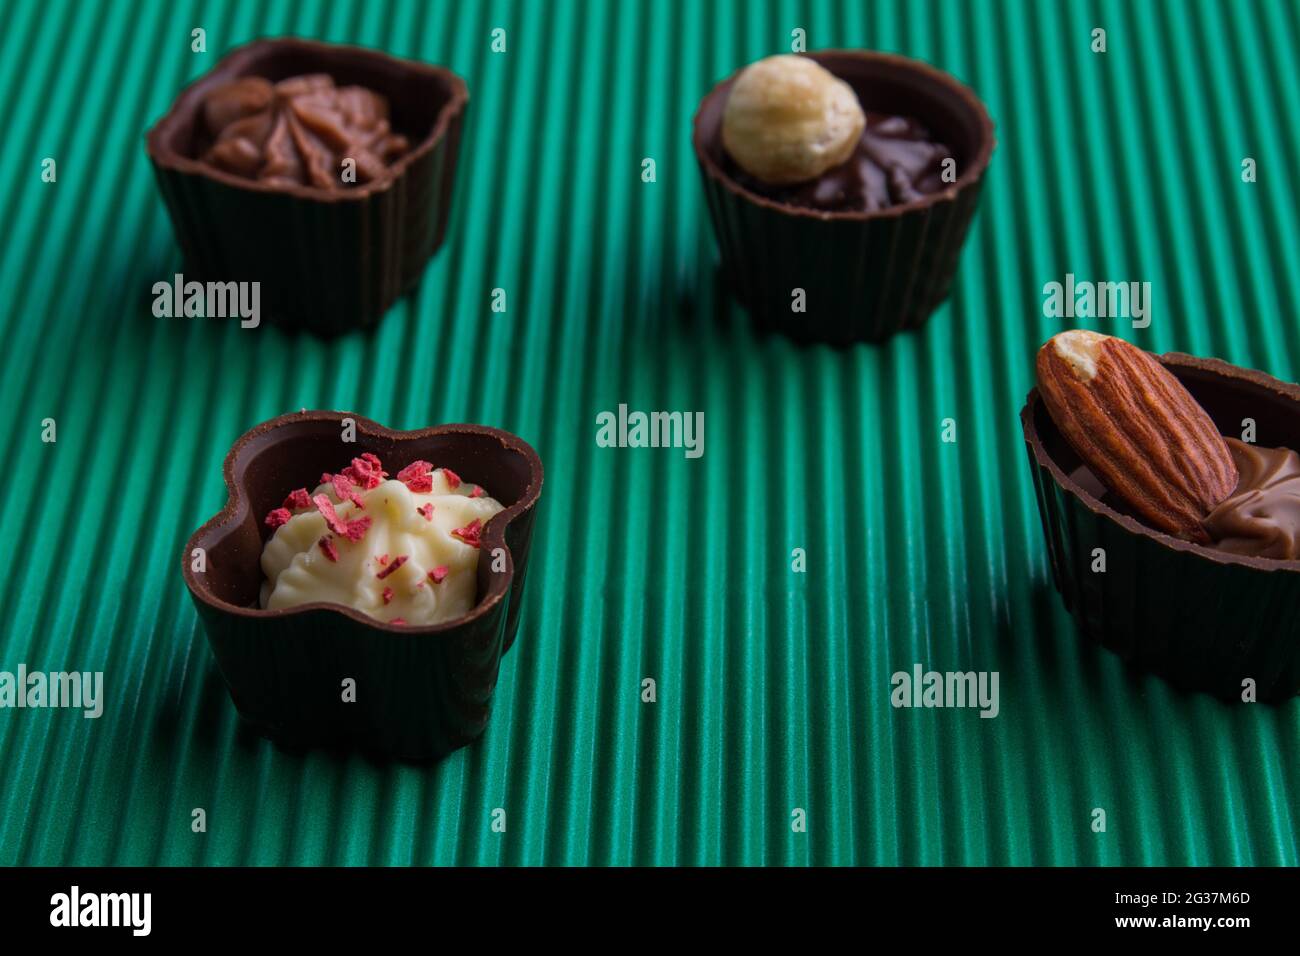 Sweet chocolate candies with various fillings close-up. Stock Photo